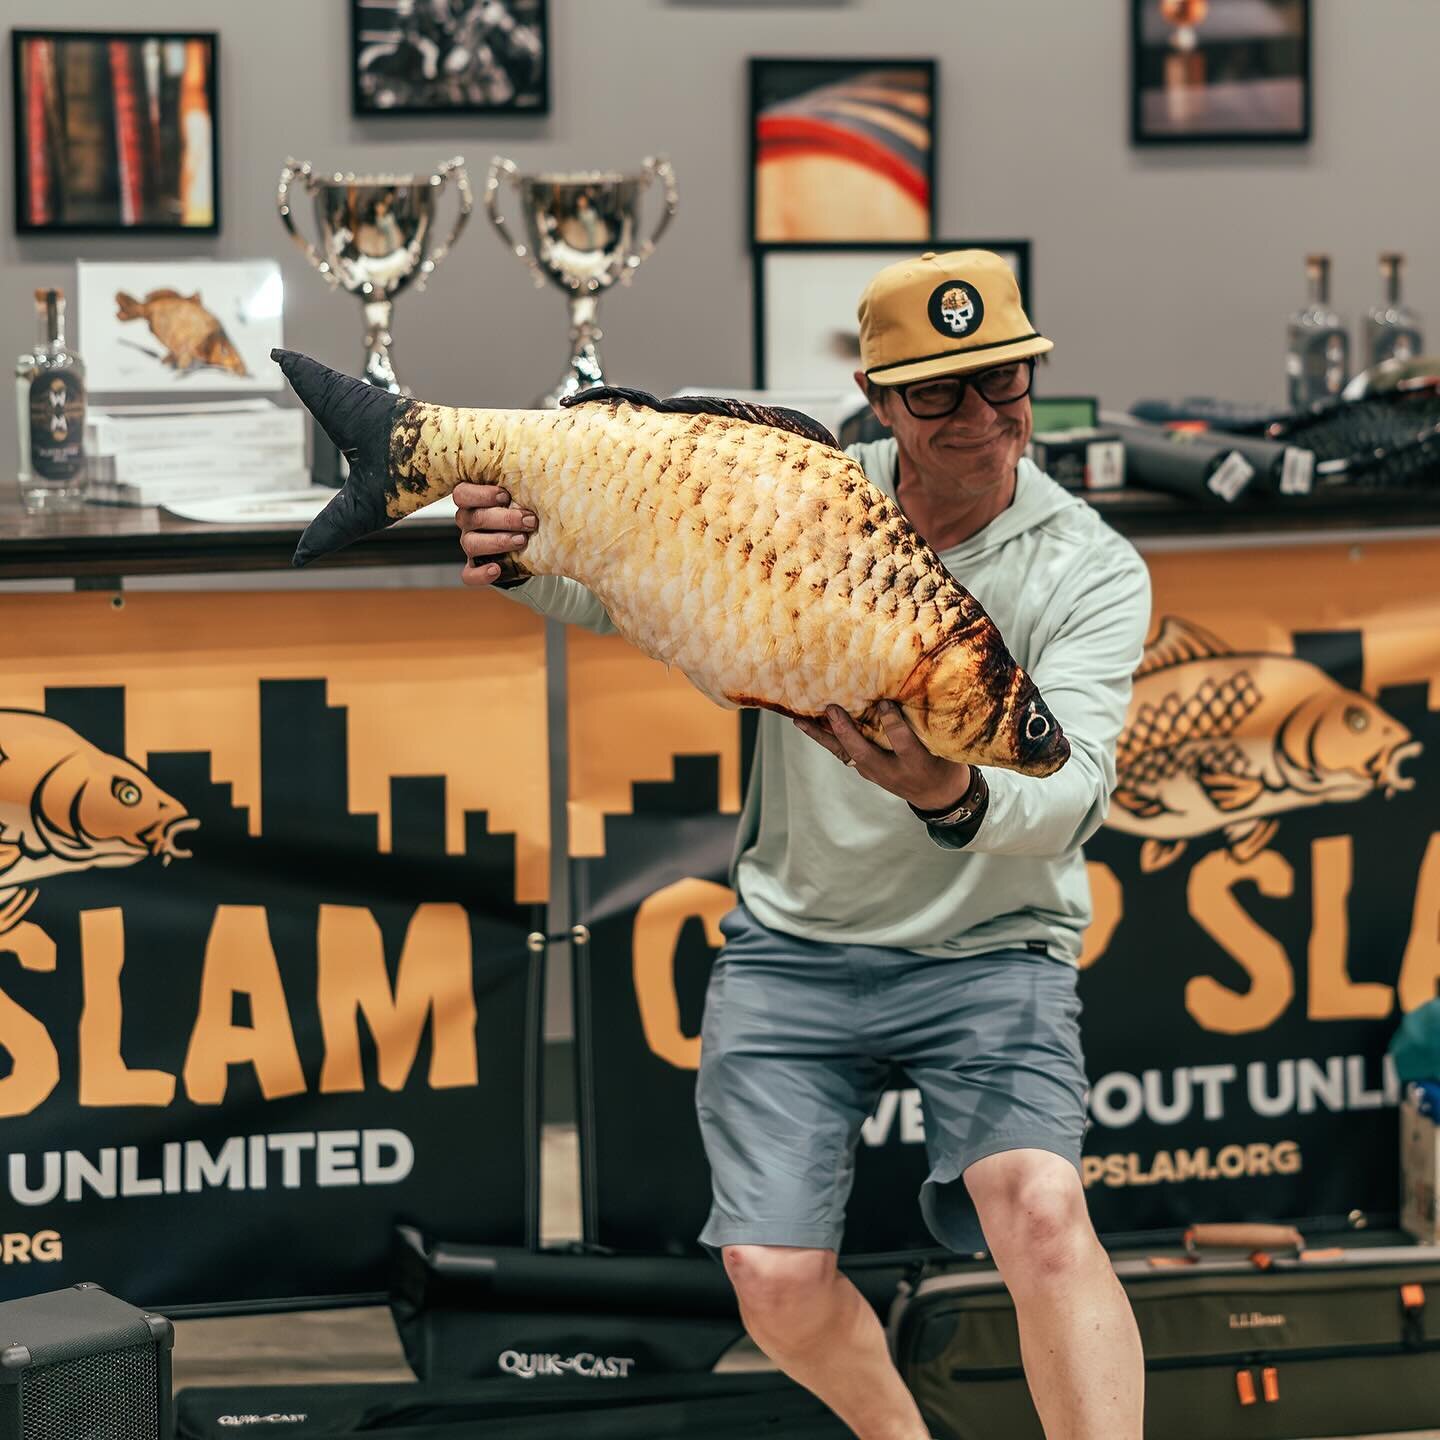 Congrats to all of our #carpslam2023 winners and Big thanks to all of our sponsors that make CarpSlam possible! 

@orvisflyfishing 
@RareWaters_
@25ontheFly
@RiverSmithUSA
@Yeti
@umpquafeathermerchants 
@EchoFlyFishing
@Patagonia
@FlyLords
@LidRig
@F